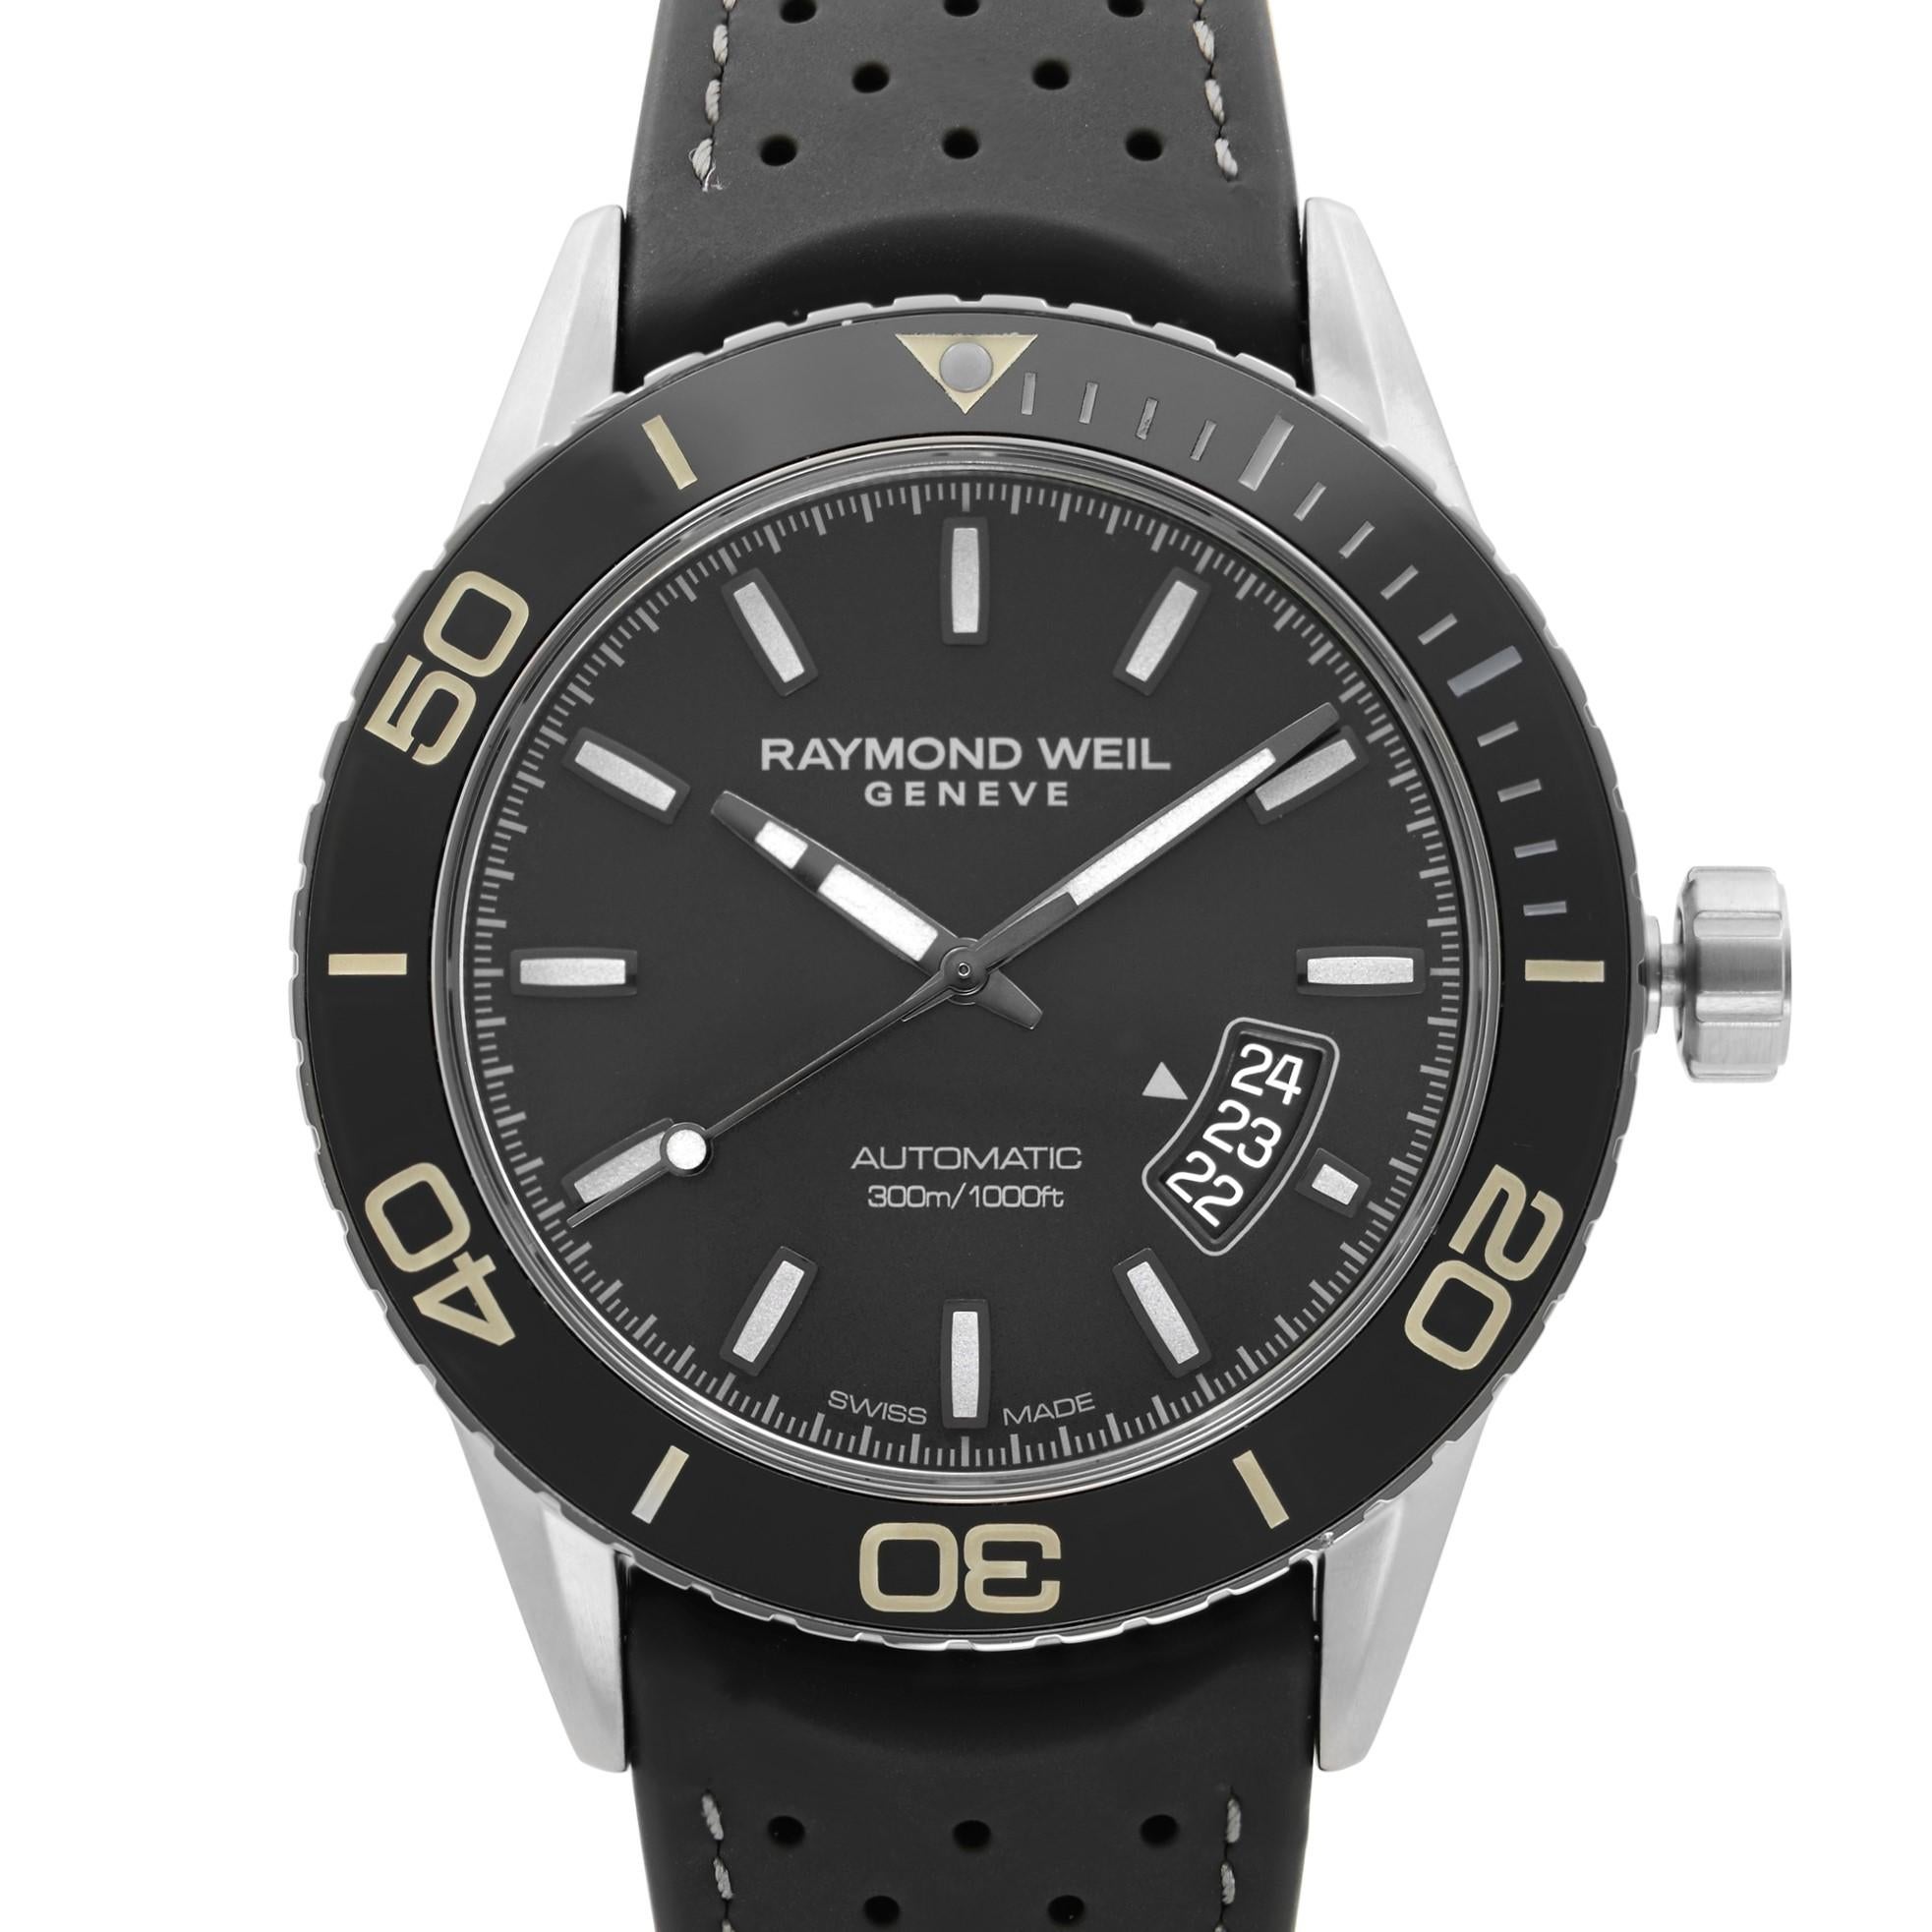 Unworn Raymond Weil Freelancer Gray PVD Steel Ceramic Automatic Men's Watch 2760-TR1-20001. This Beautiful Timepiece Features: Gray Stainless Steel Case with a Back Rubber Strap, Uni-Directional Rotating Black Ceramic Bezel, Black Dial with Luminous